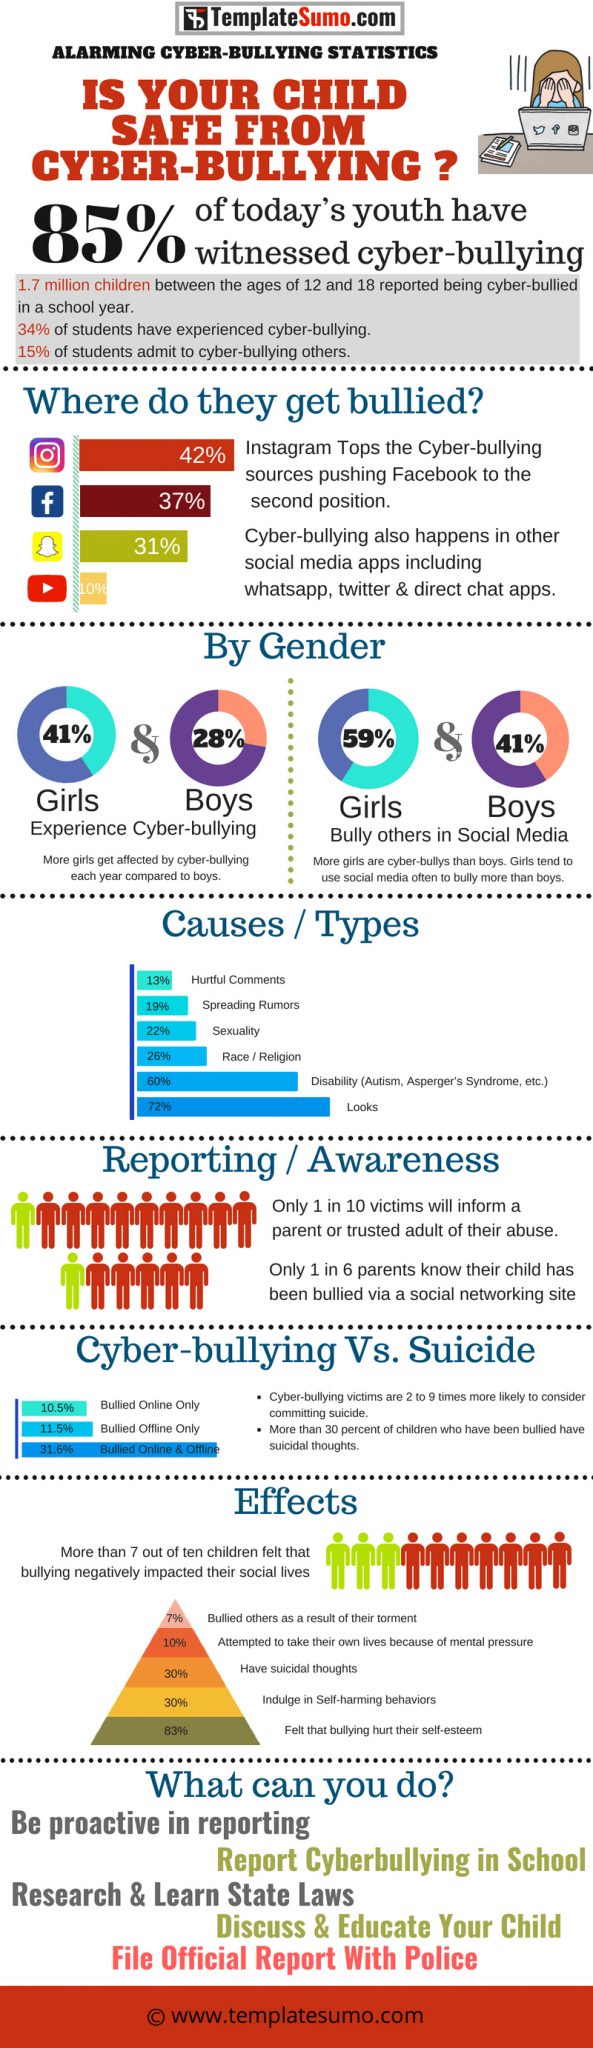 Is Your Child Safe From Cyber-Bullying 